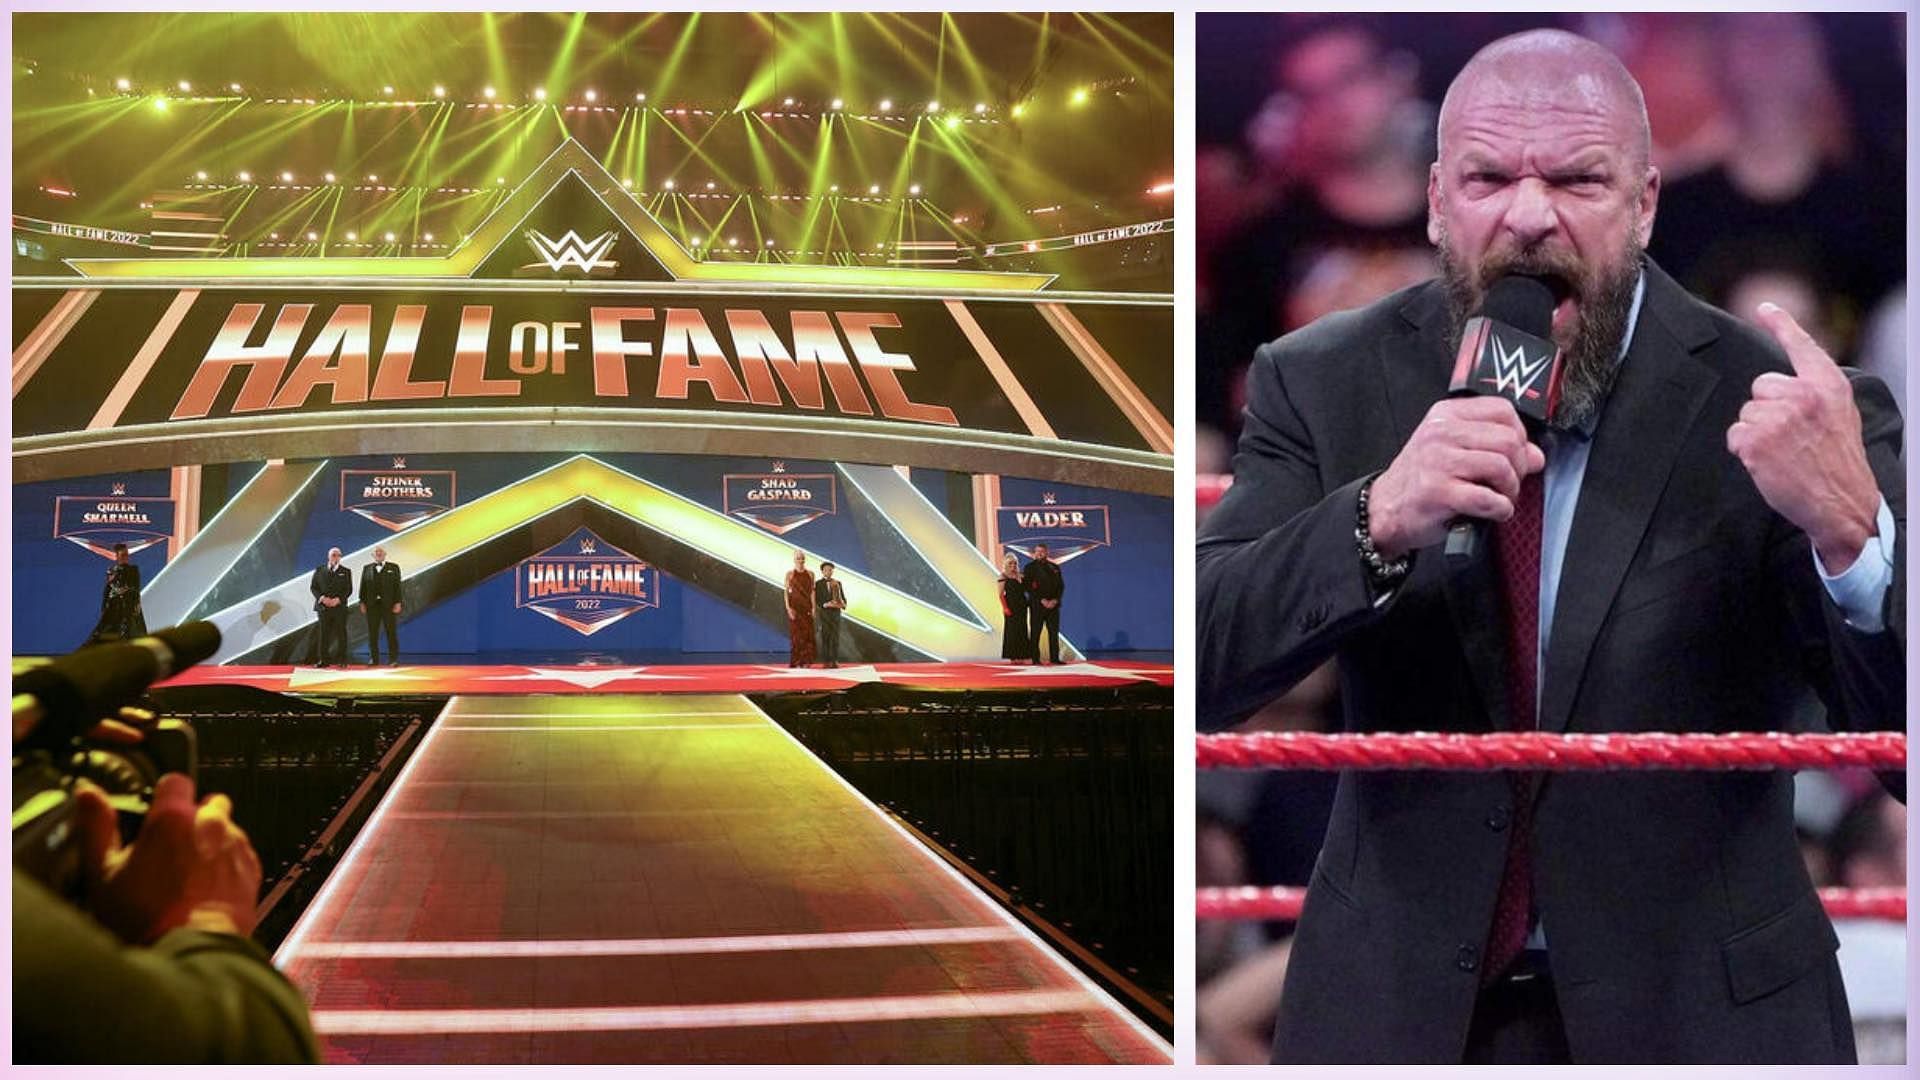 WWE Hall of Fame is set to take place take place on April 5, 2024, at Wells Fargo Center in Philadelphia